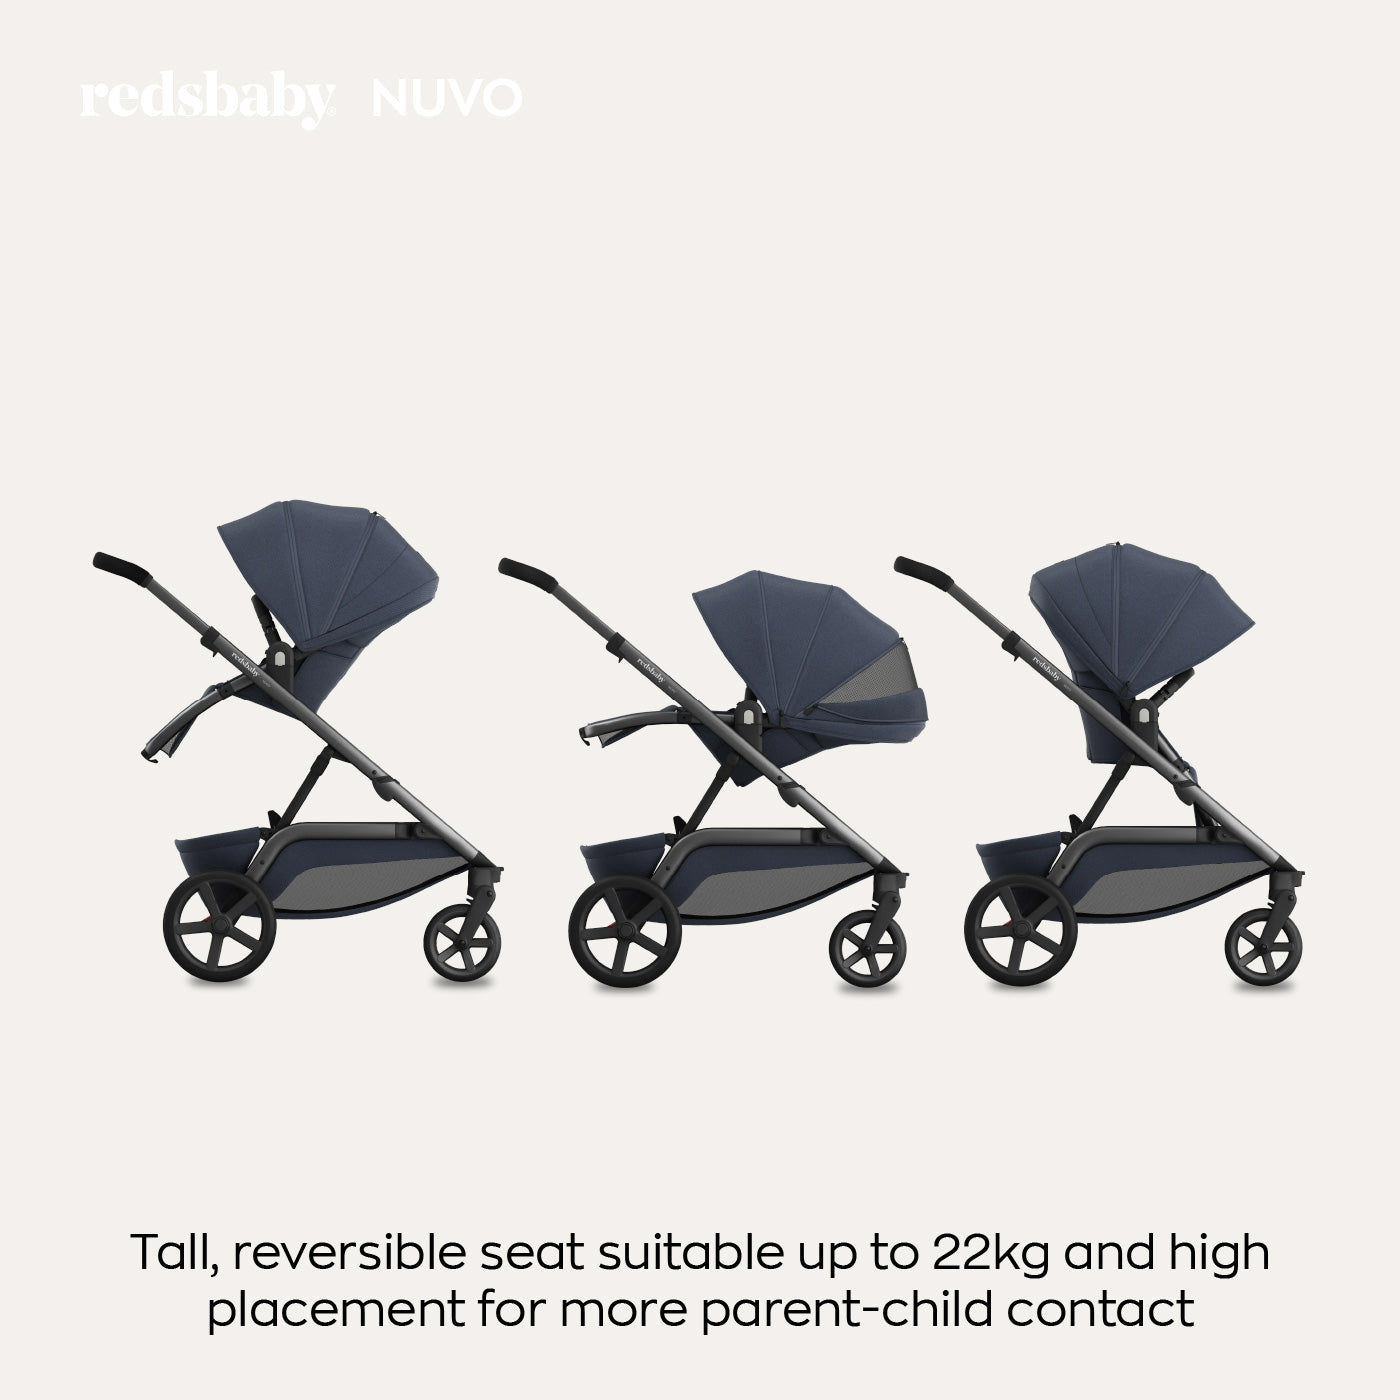 Image of three navy blue strollers with the text "reds baby NUVO. Tall, reversible seat suitable up to 22kg and high placement for more parent-child contact." Each stroller is positioned at a different angle to showcase the reversible seat feature.